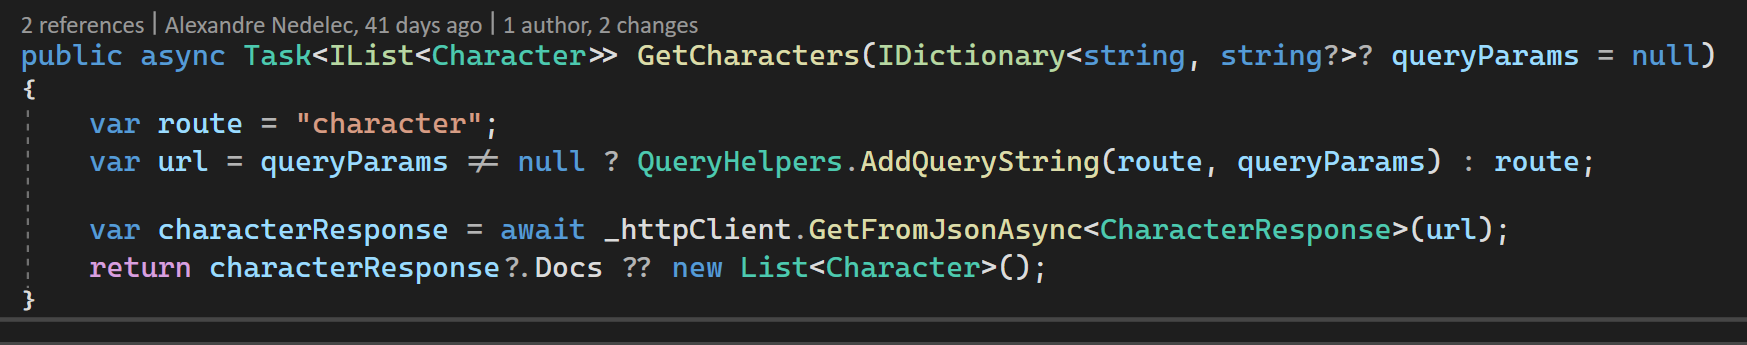 The code of GetCharacters method without manual deserialization.